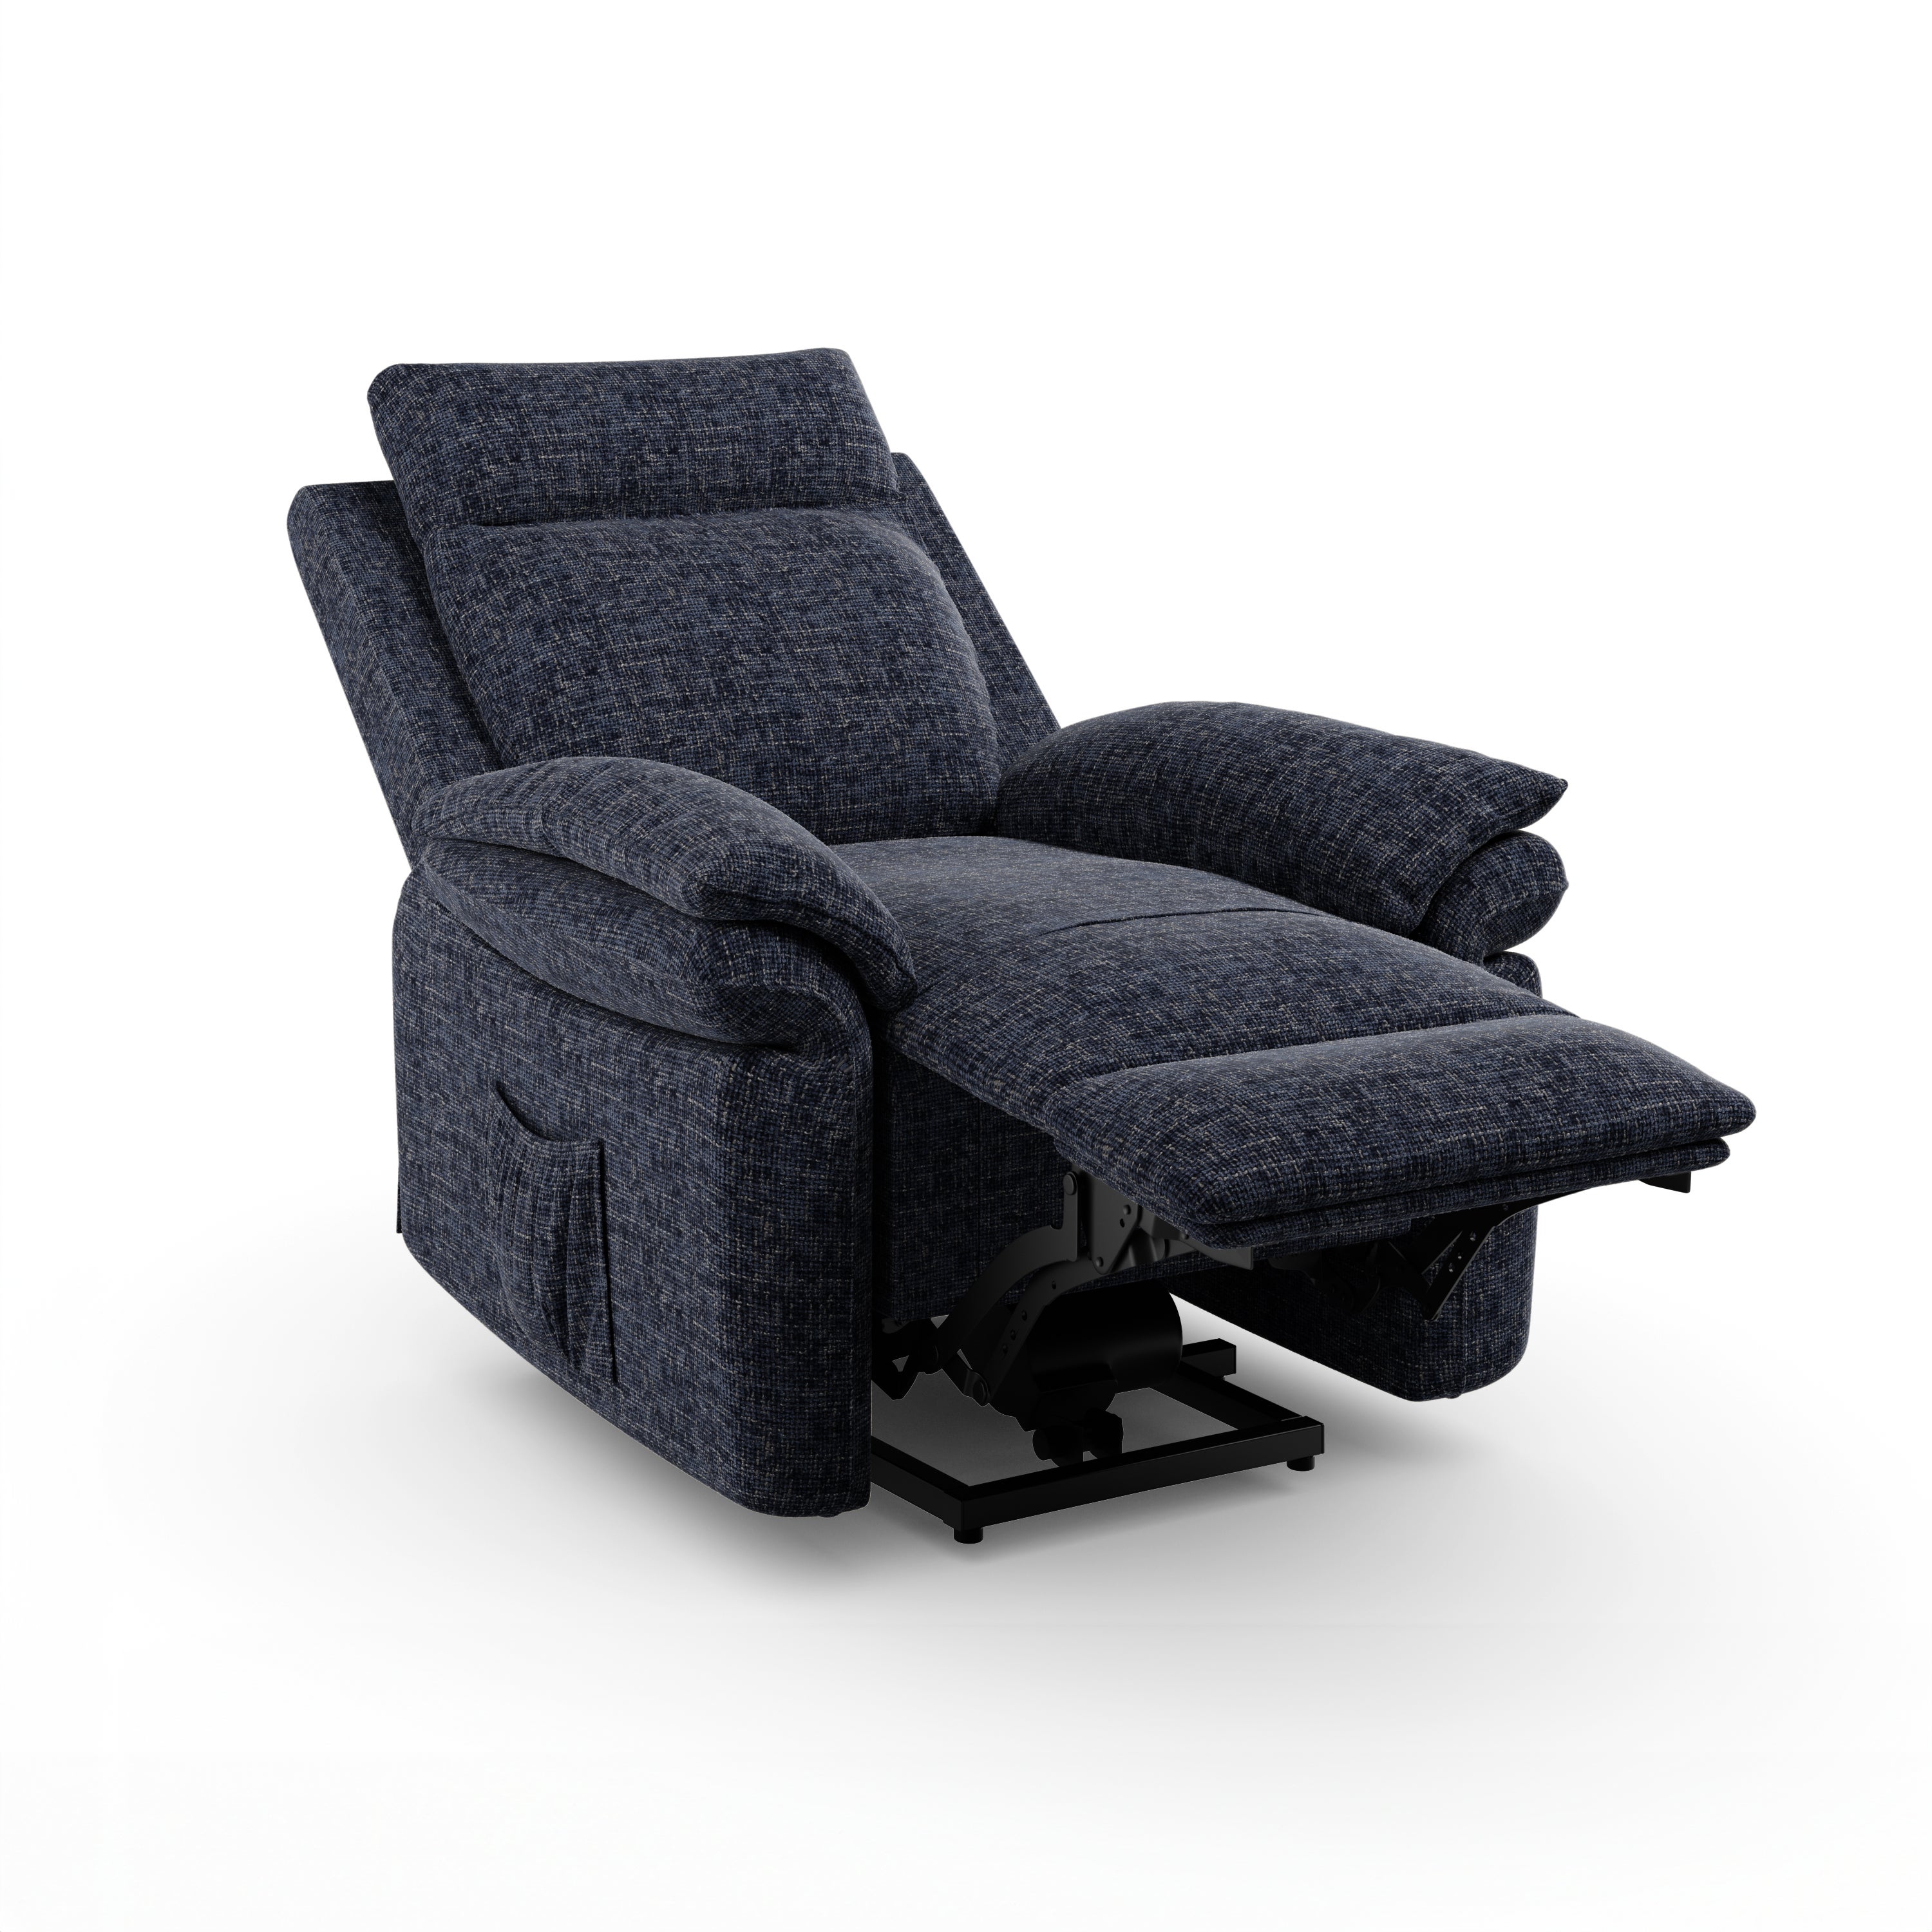 Kenley Padded Rise and Recline Chair, Chunky Chenille | Dunelm